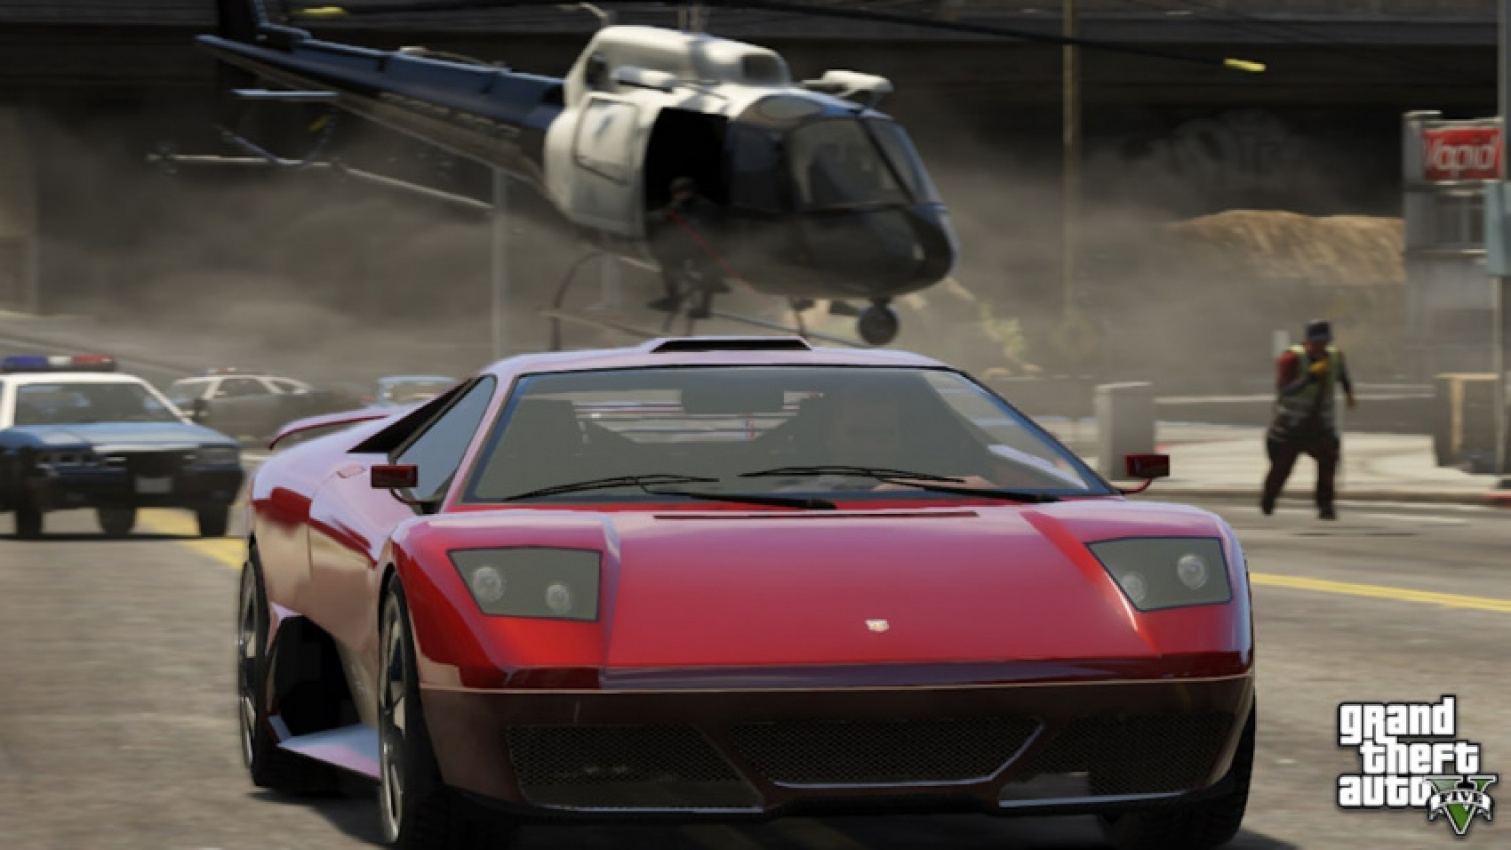 autos, cars, gaming roundup, gran turismo, grand theft auto, grid, toys/games, rockstar games confirms that 'gta vi' development is 'well underway' | gaming roundup